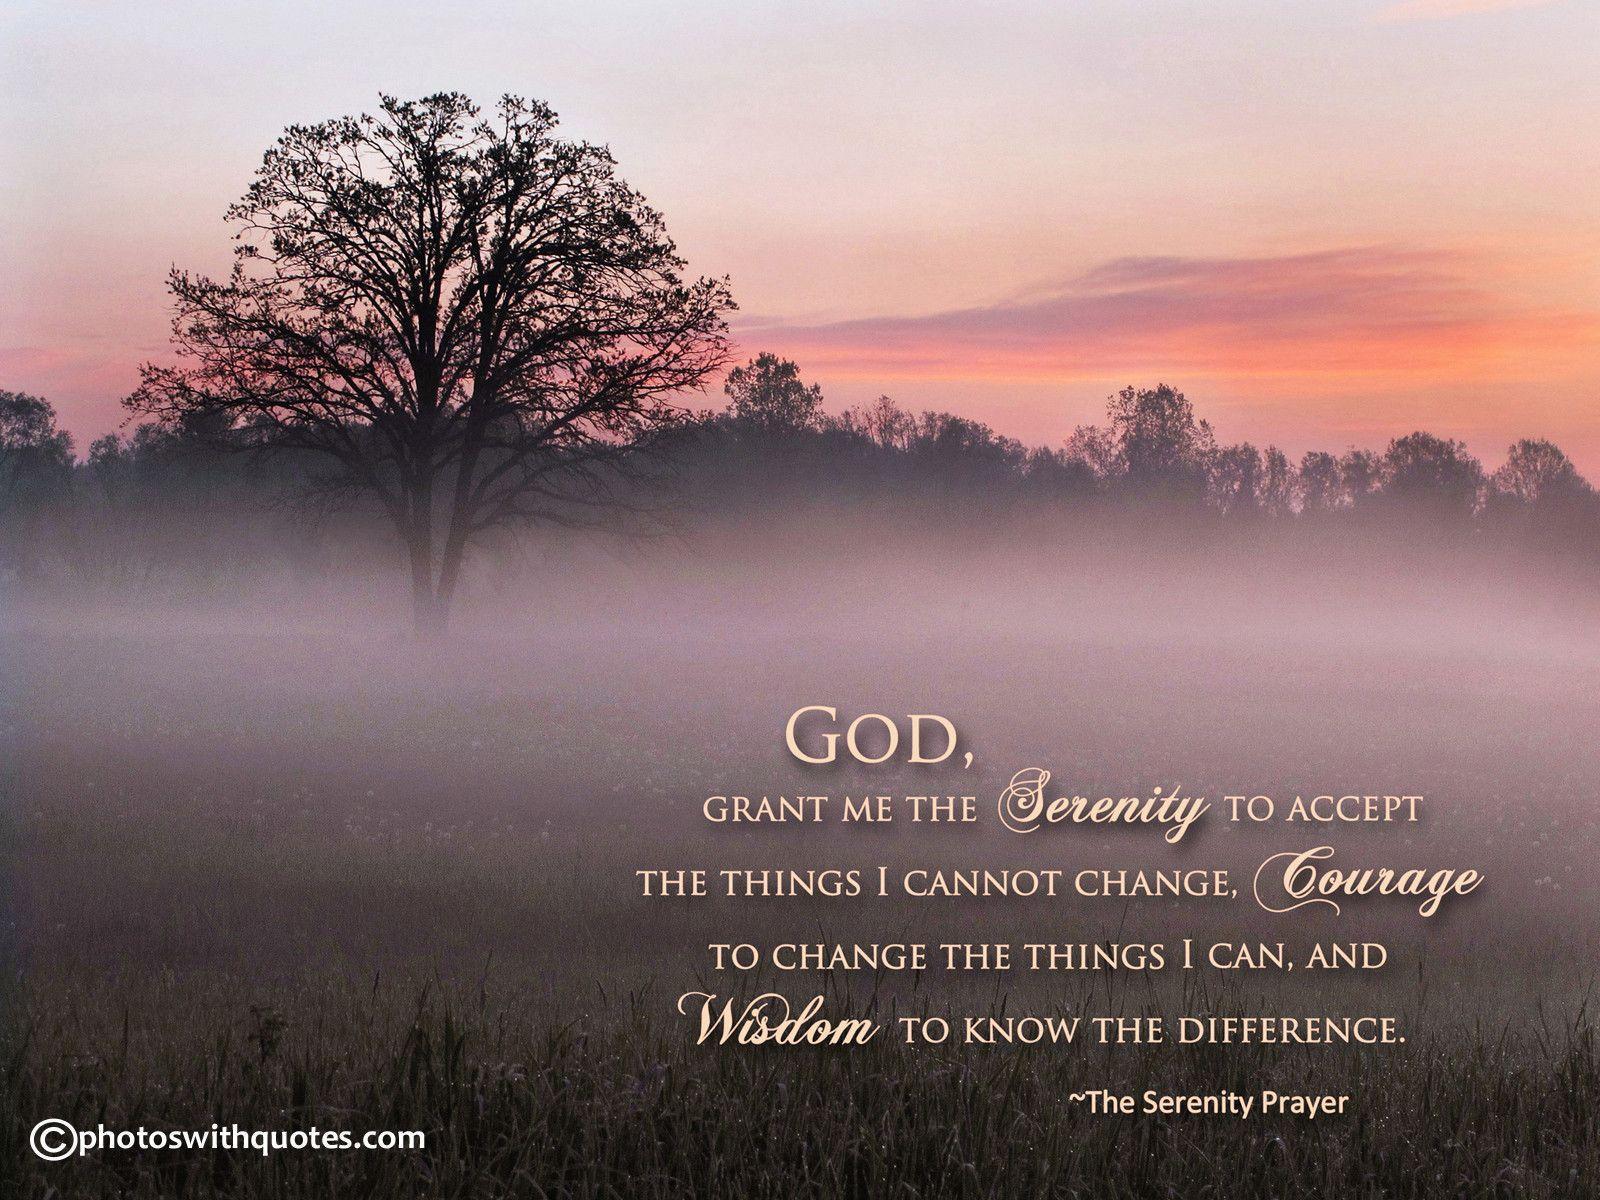 Serenity Prayer. FREE picture or wallpaper!